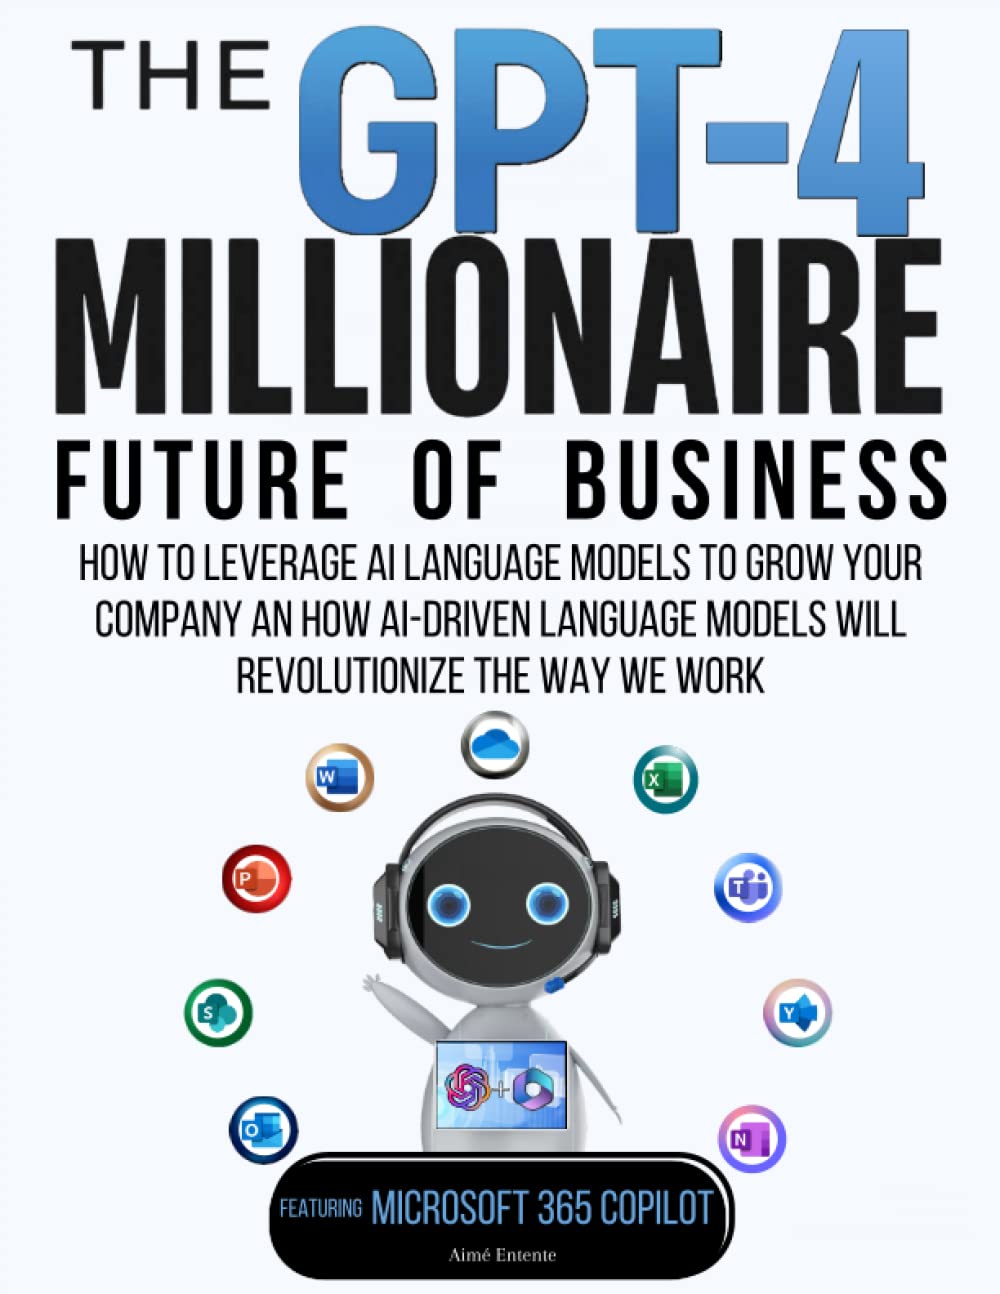 The GPT-4 Millionaire: Future of Business Featuring Microsoft 365 Copilot: How to Leverage AI Language Models to Grow Your Company and How AI-driven Language Models Will Revolutionize the Way We Work